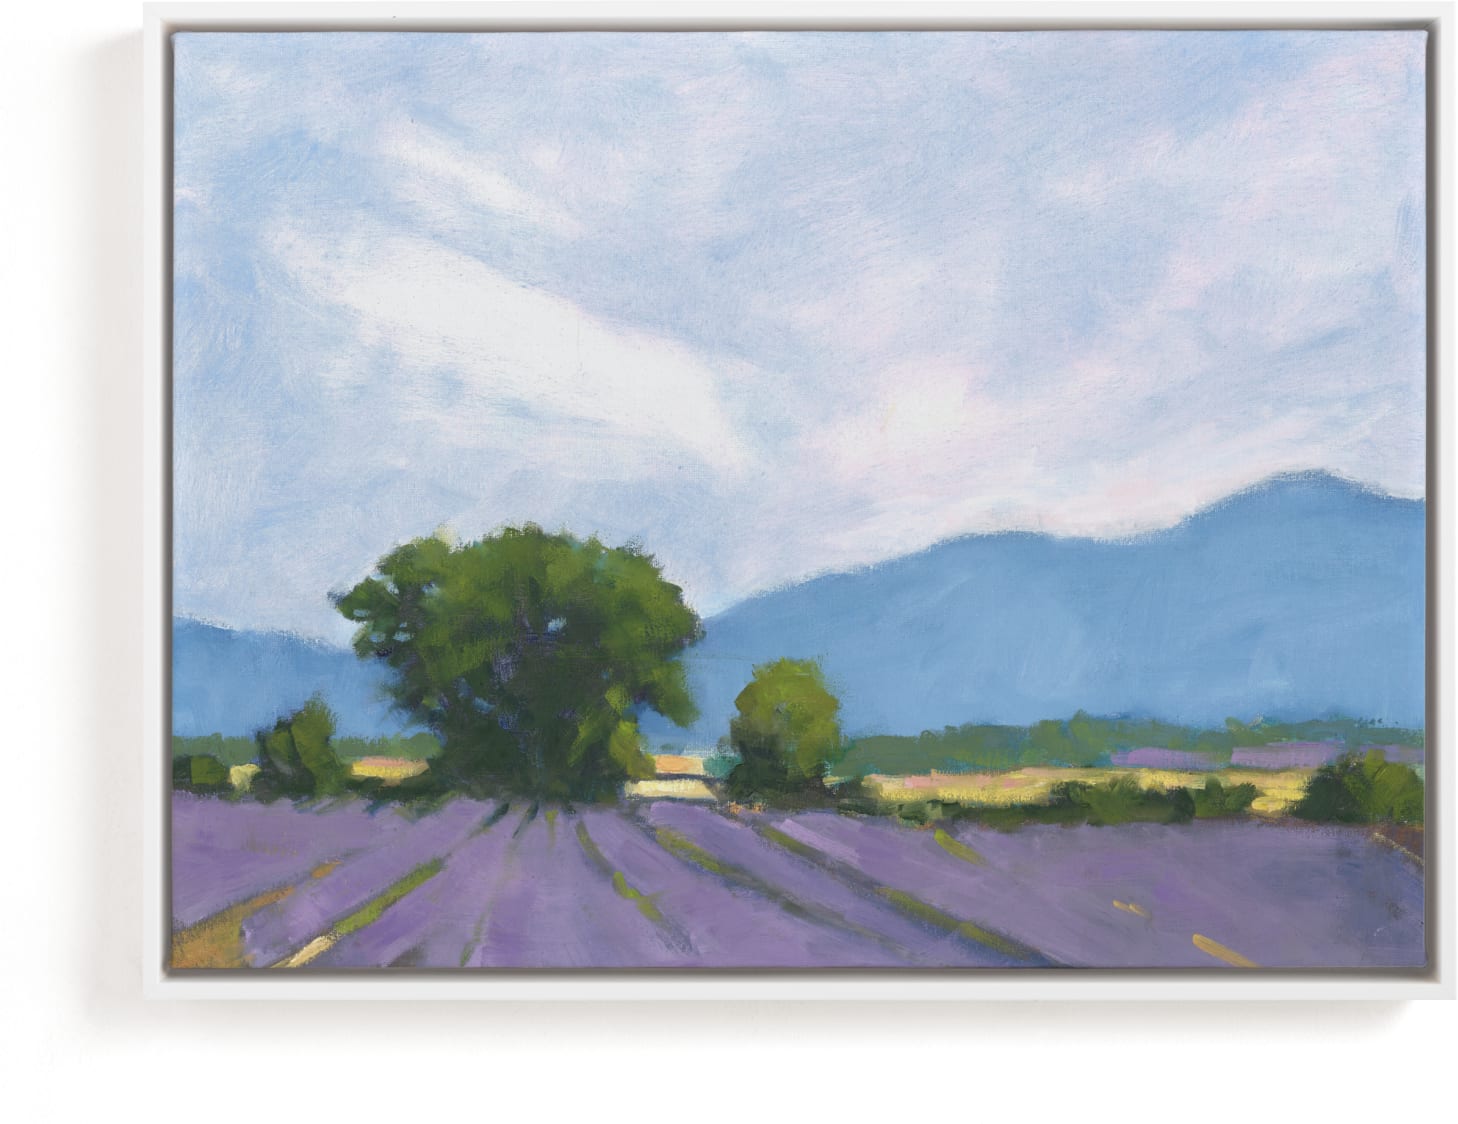 This is a blue art by Marie Stone called Lavender Fields.